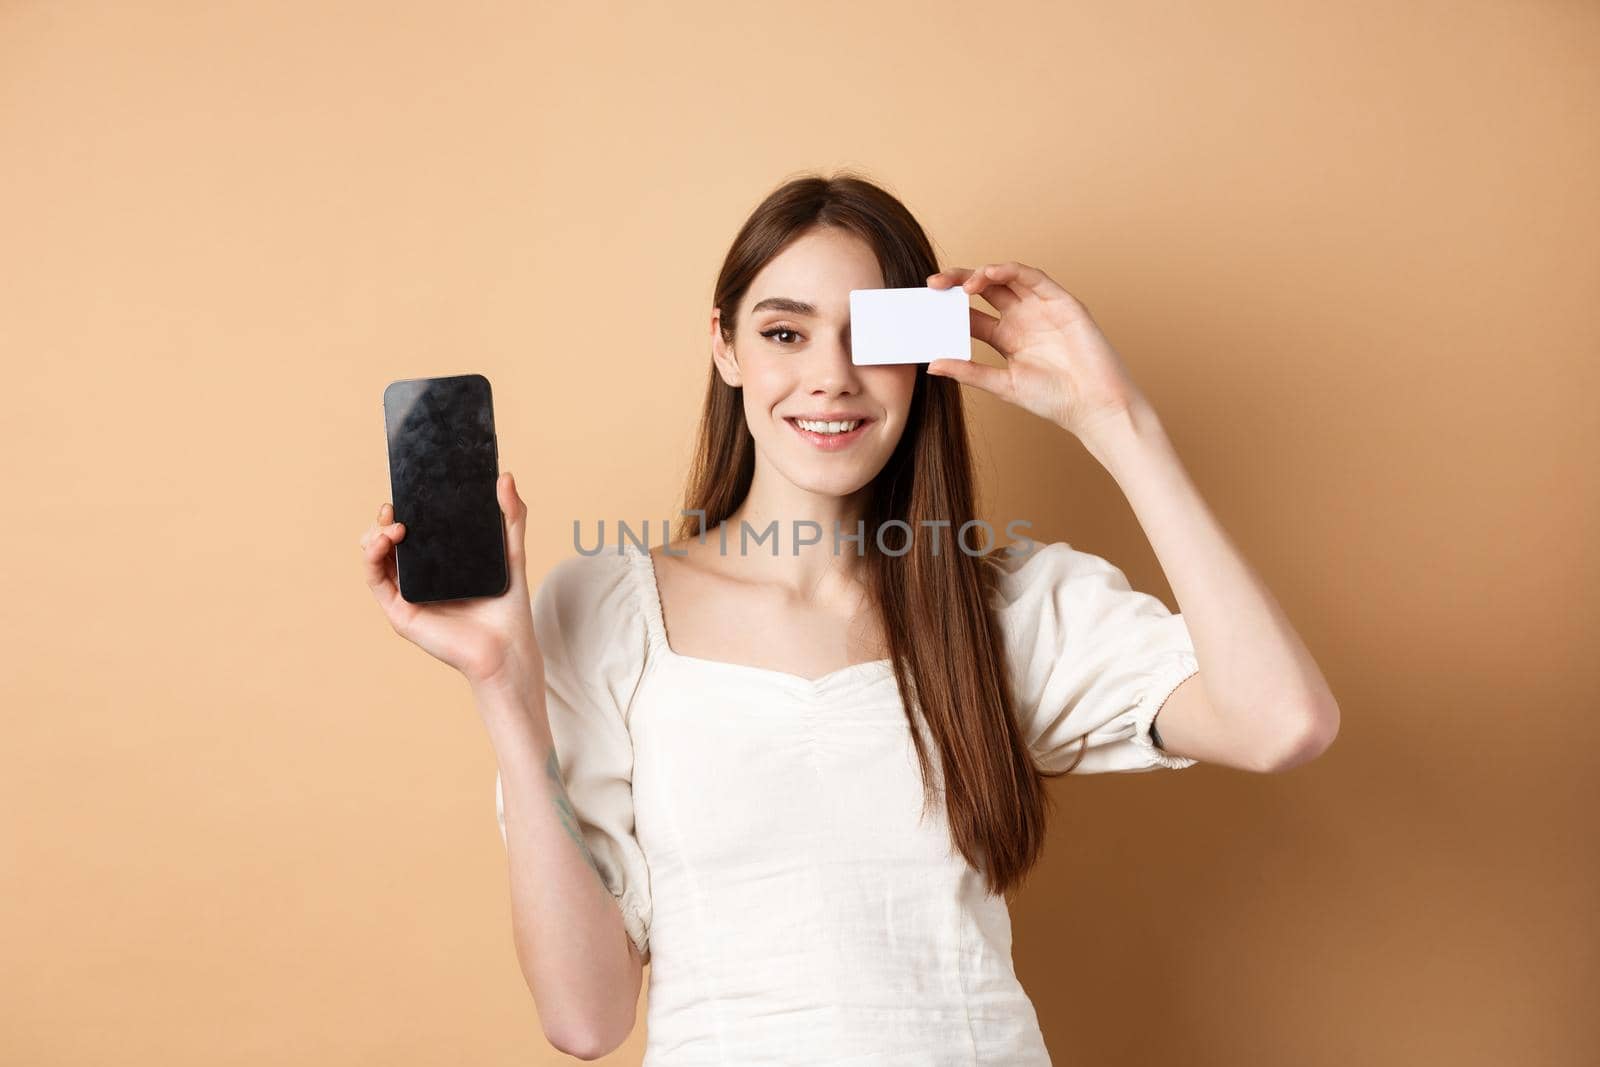 Cheerful young woman showing plastic credit card and empty mobile phone screen, smiling pleased at camera, standing on beige background.